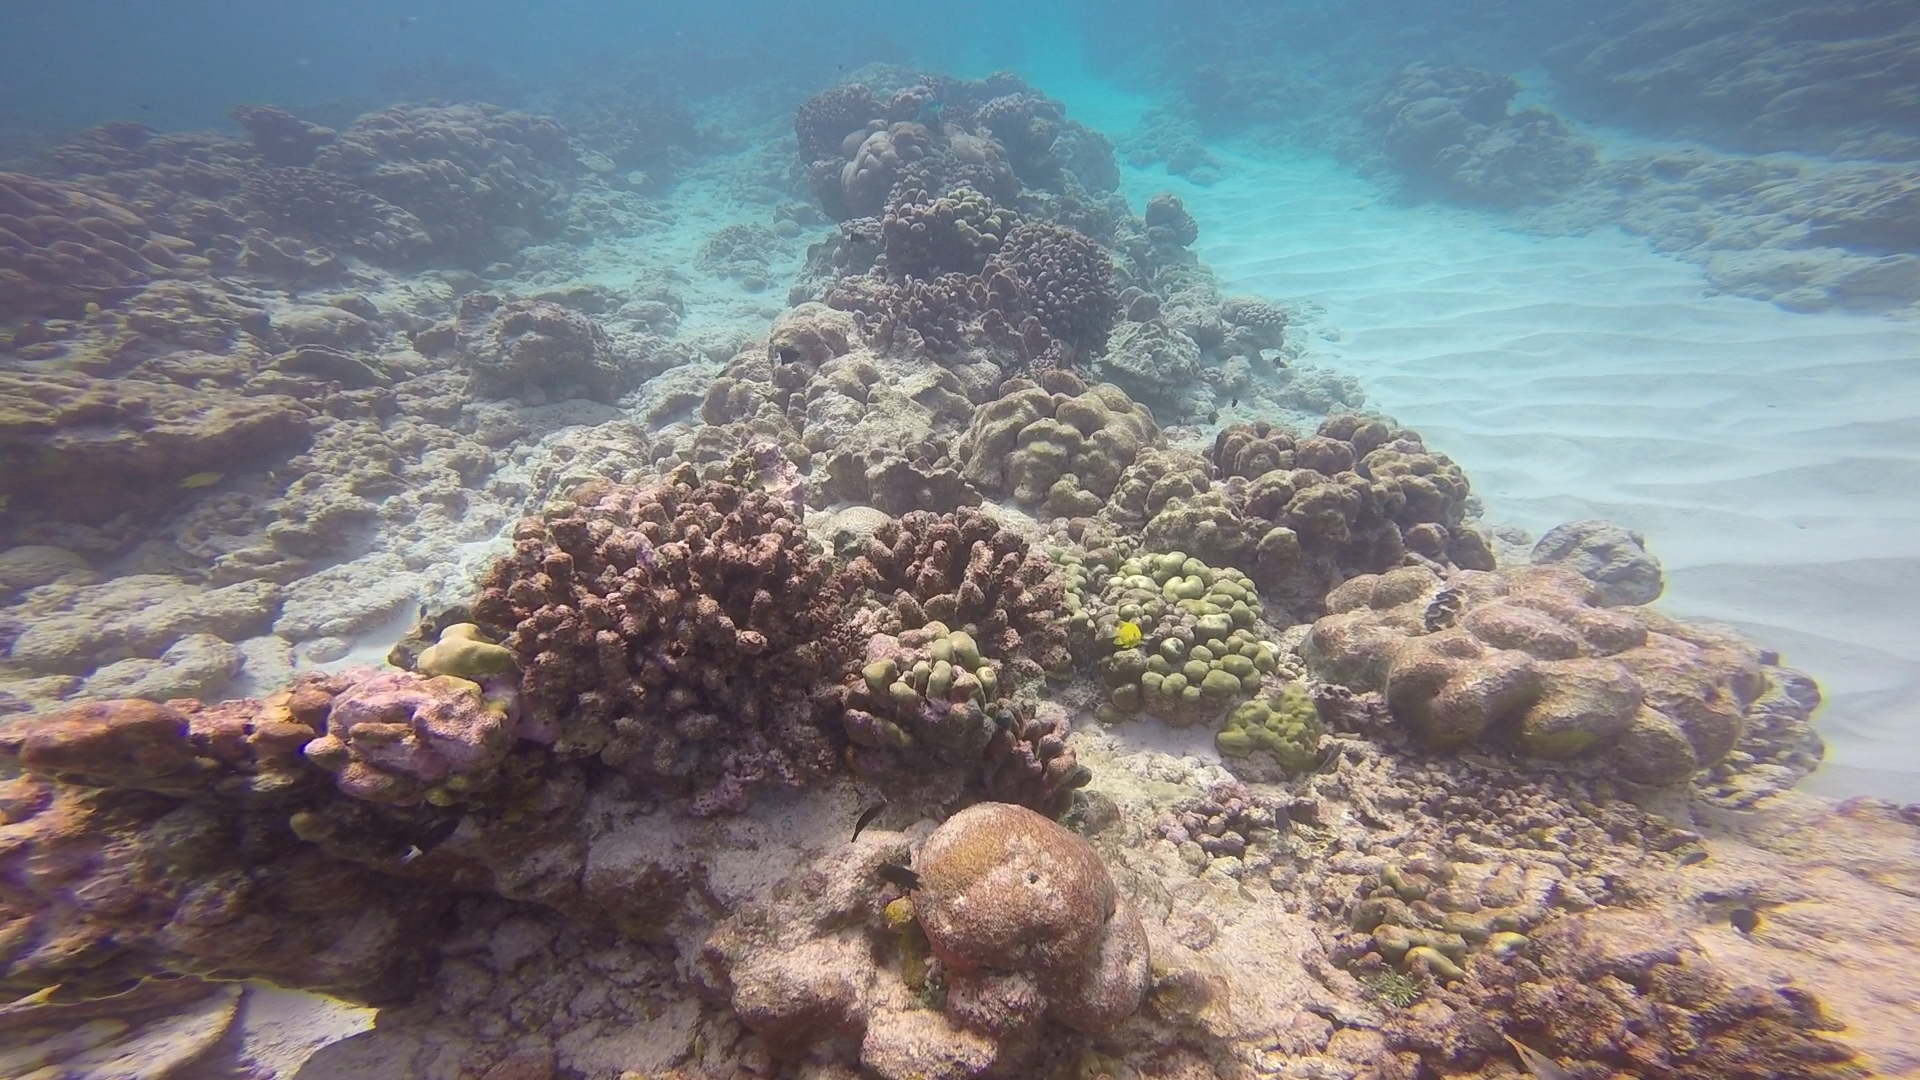 Dead coral reefs during a dive at Christmas Island on April, 2016.